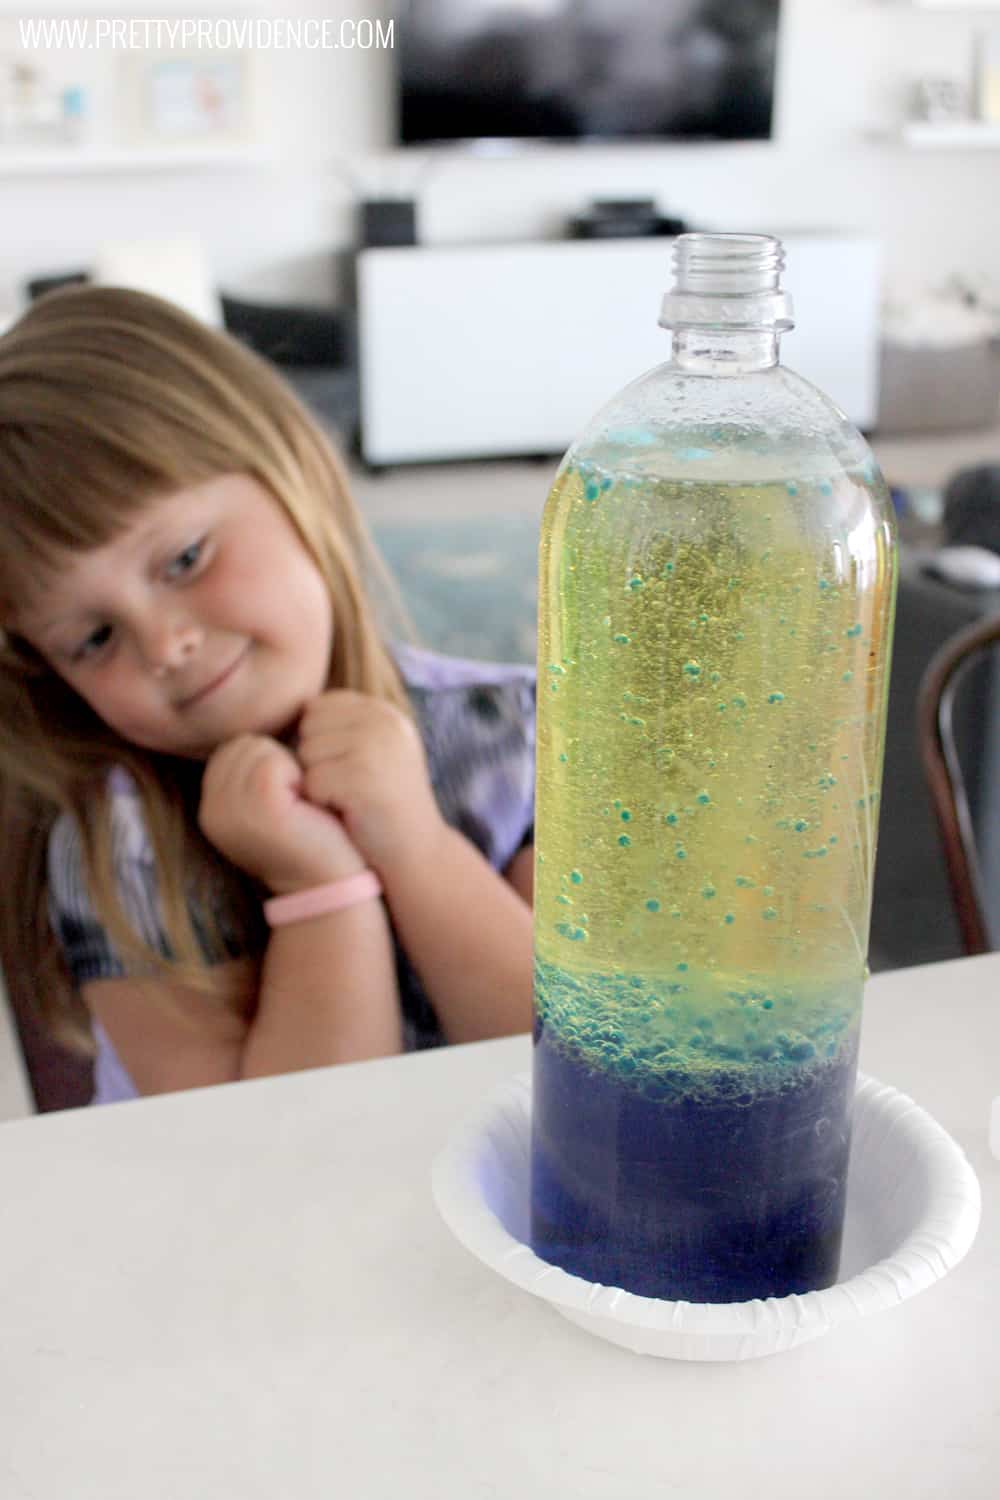 These homemade lava lamps were such a fun activity with my kiddos! They had so much fun, and it was super easy, too! 